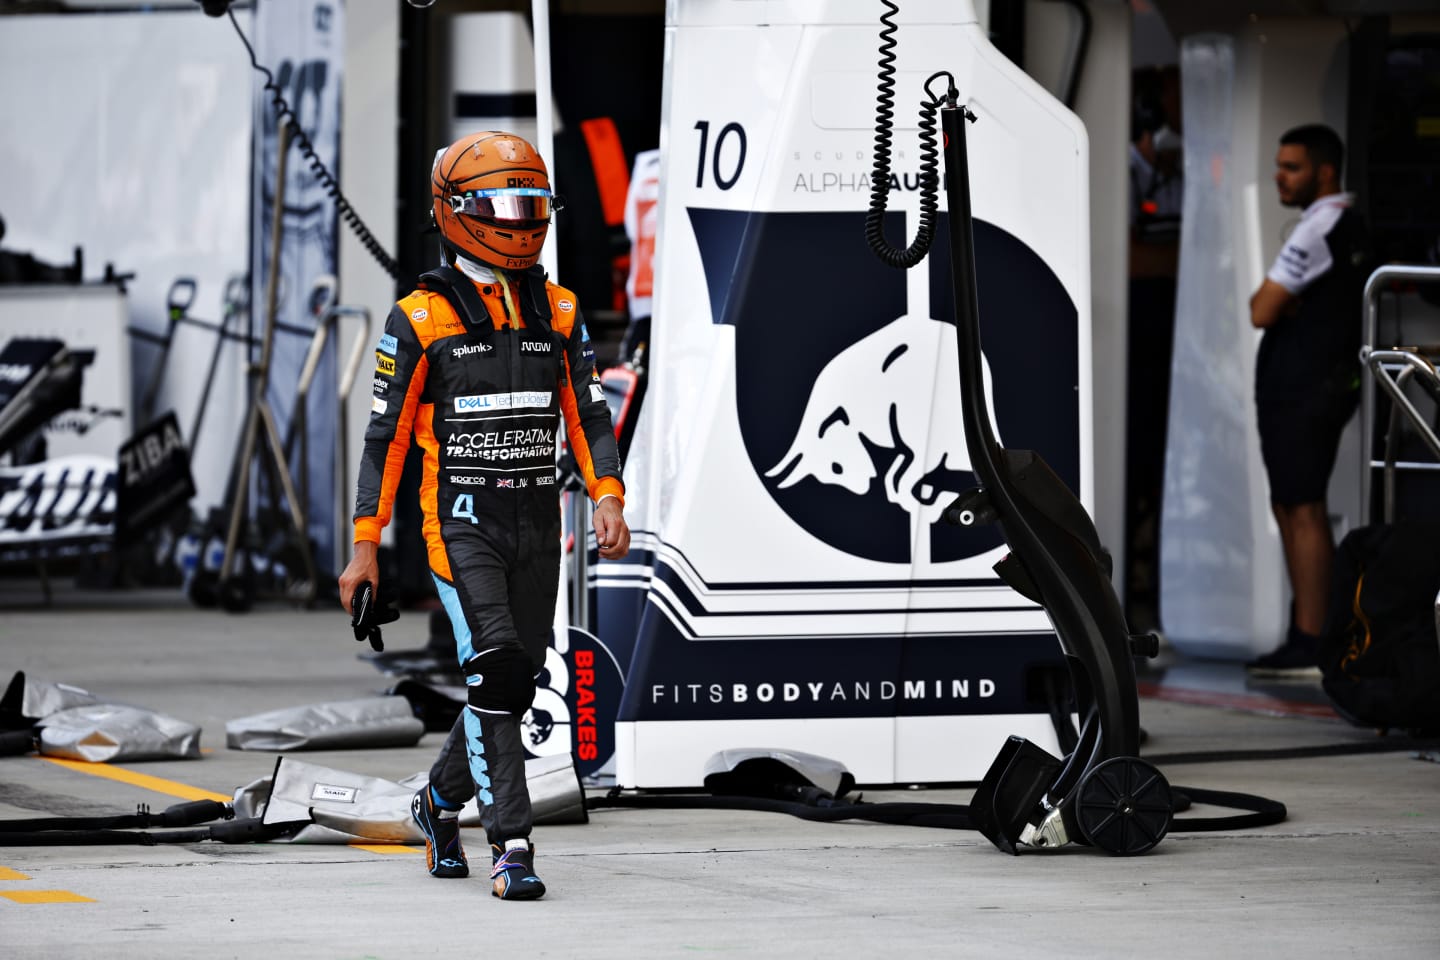 MIAMI, FLORIDA - MAY 08: Lando Norris of Great Britain and McLaren walks in the Pitlane after crashing out of the race during the F1 Grand Prix of Miami at the Miami International Autodrome on May 08, 2022 in Miami, Florida. (Photo by Jared C. Tilton/Getty Images)